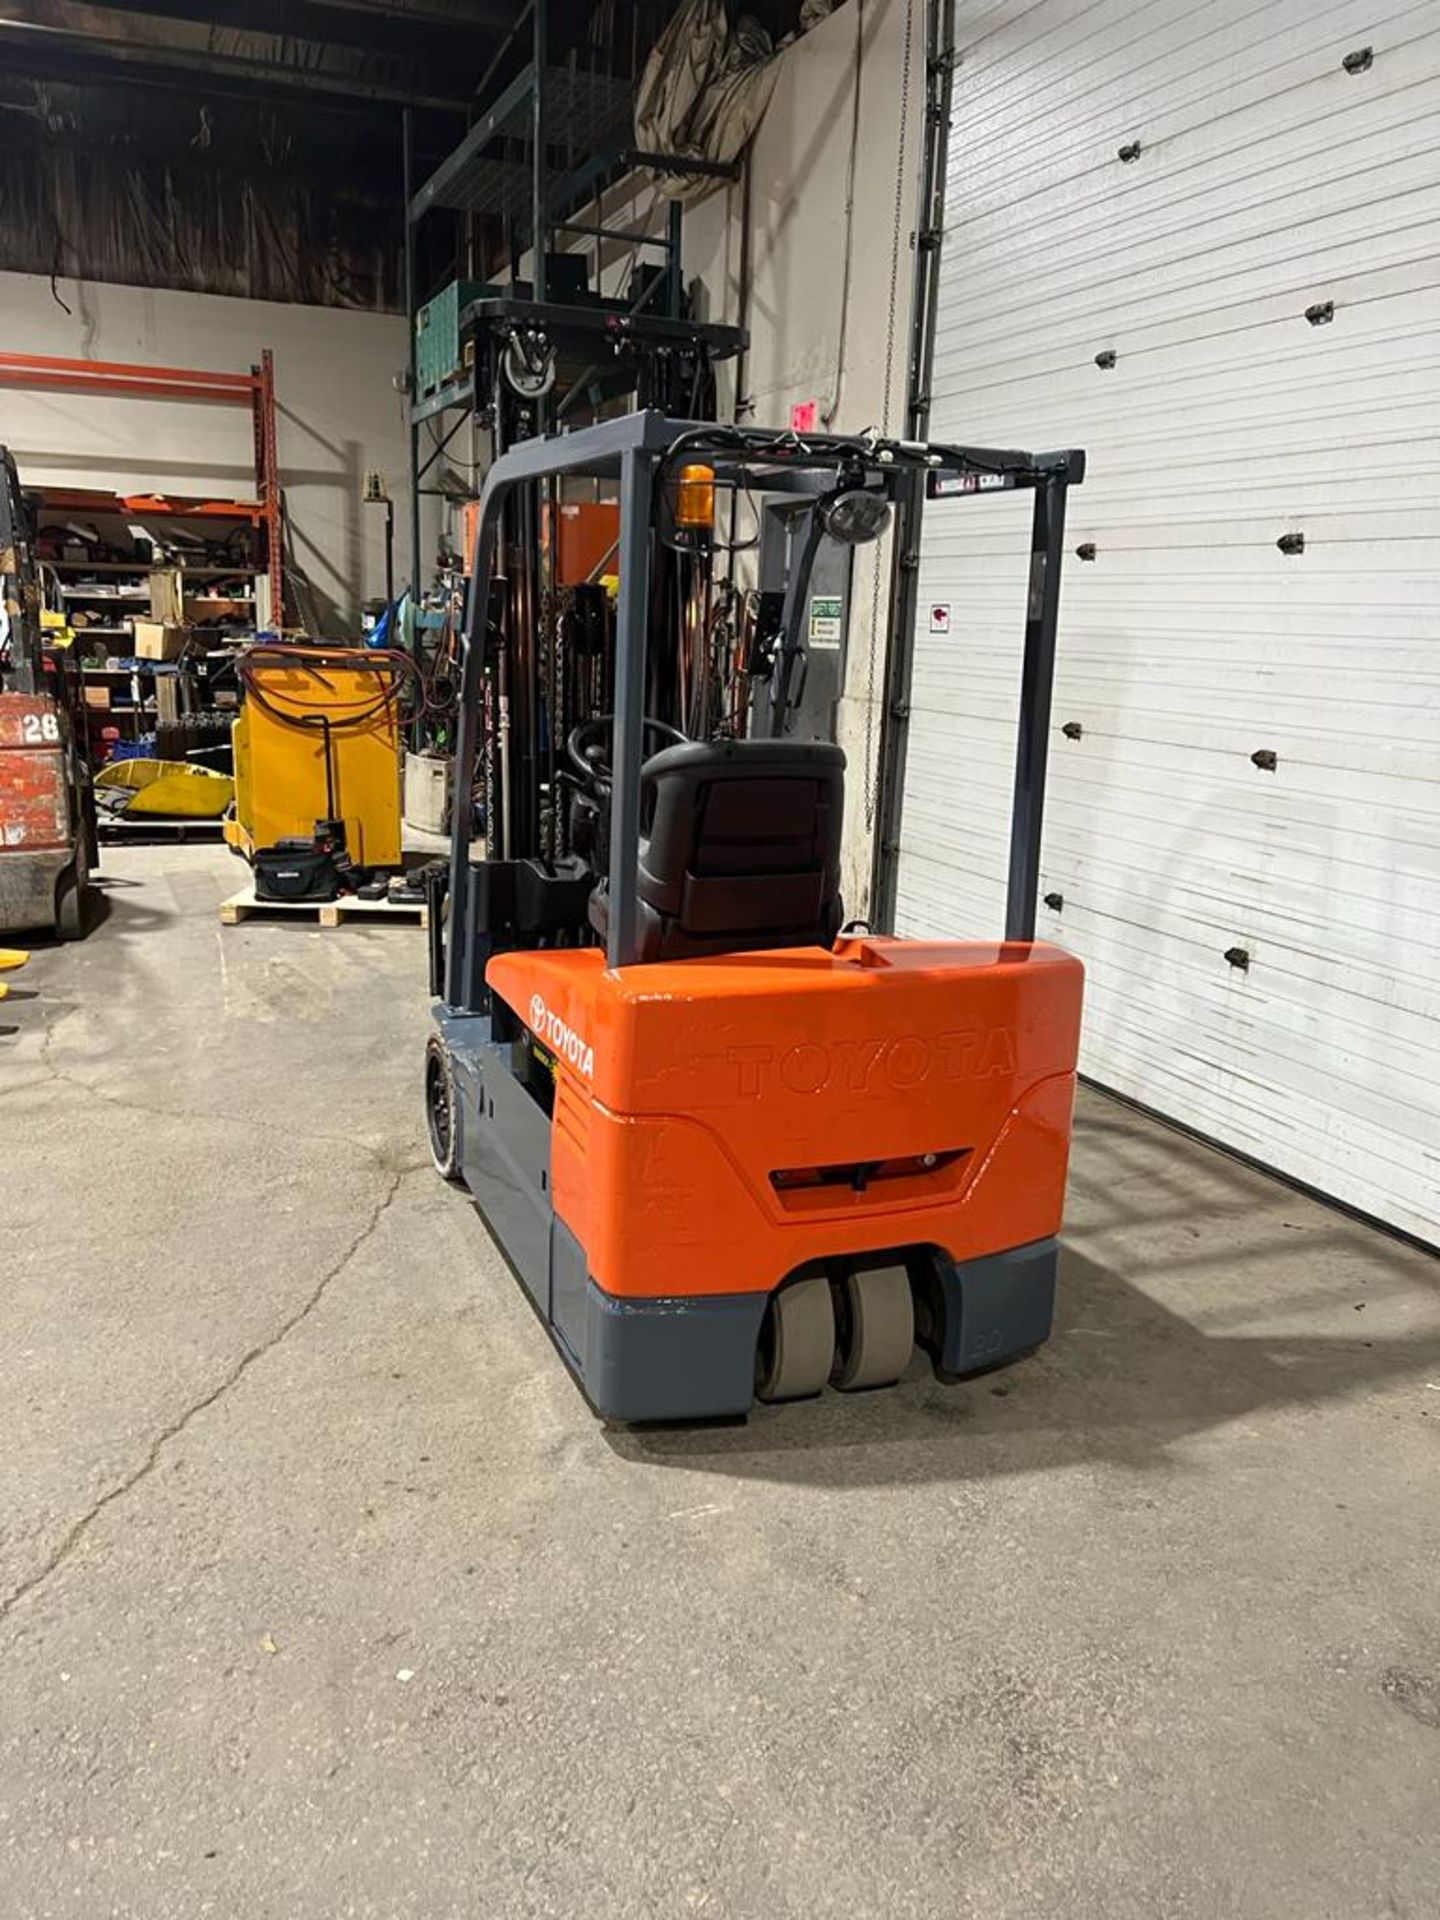 NICE Toyota 4,000lbs Capacity Forklift Electric 36V 3-Wheel with Sideshift 3-stage mast - FREE - Image 2 of 4